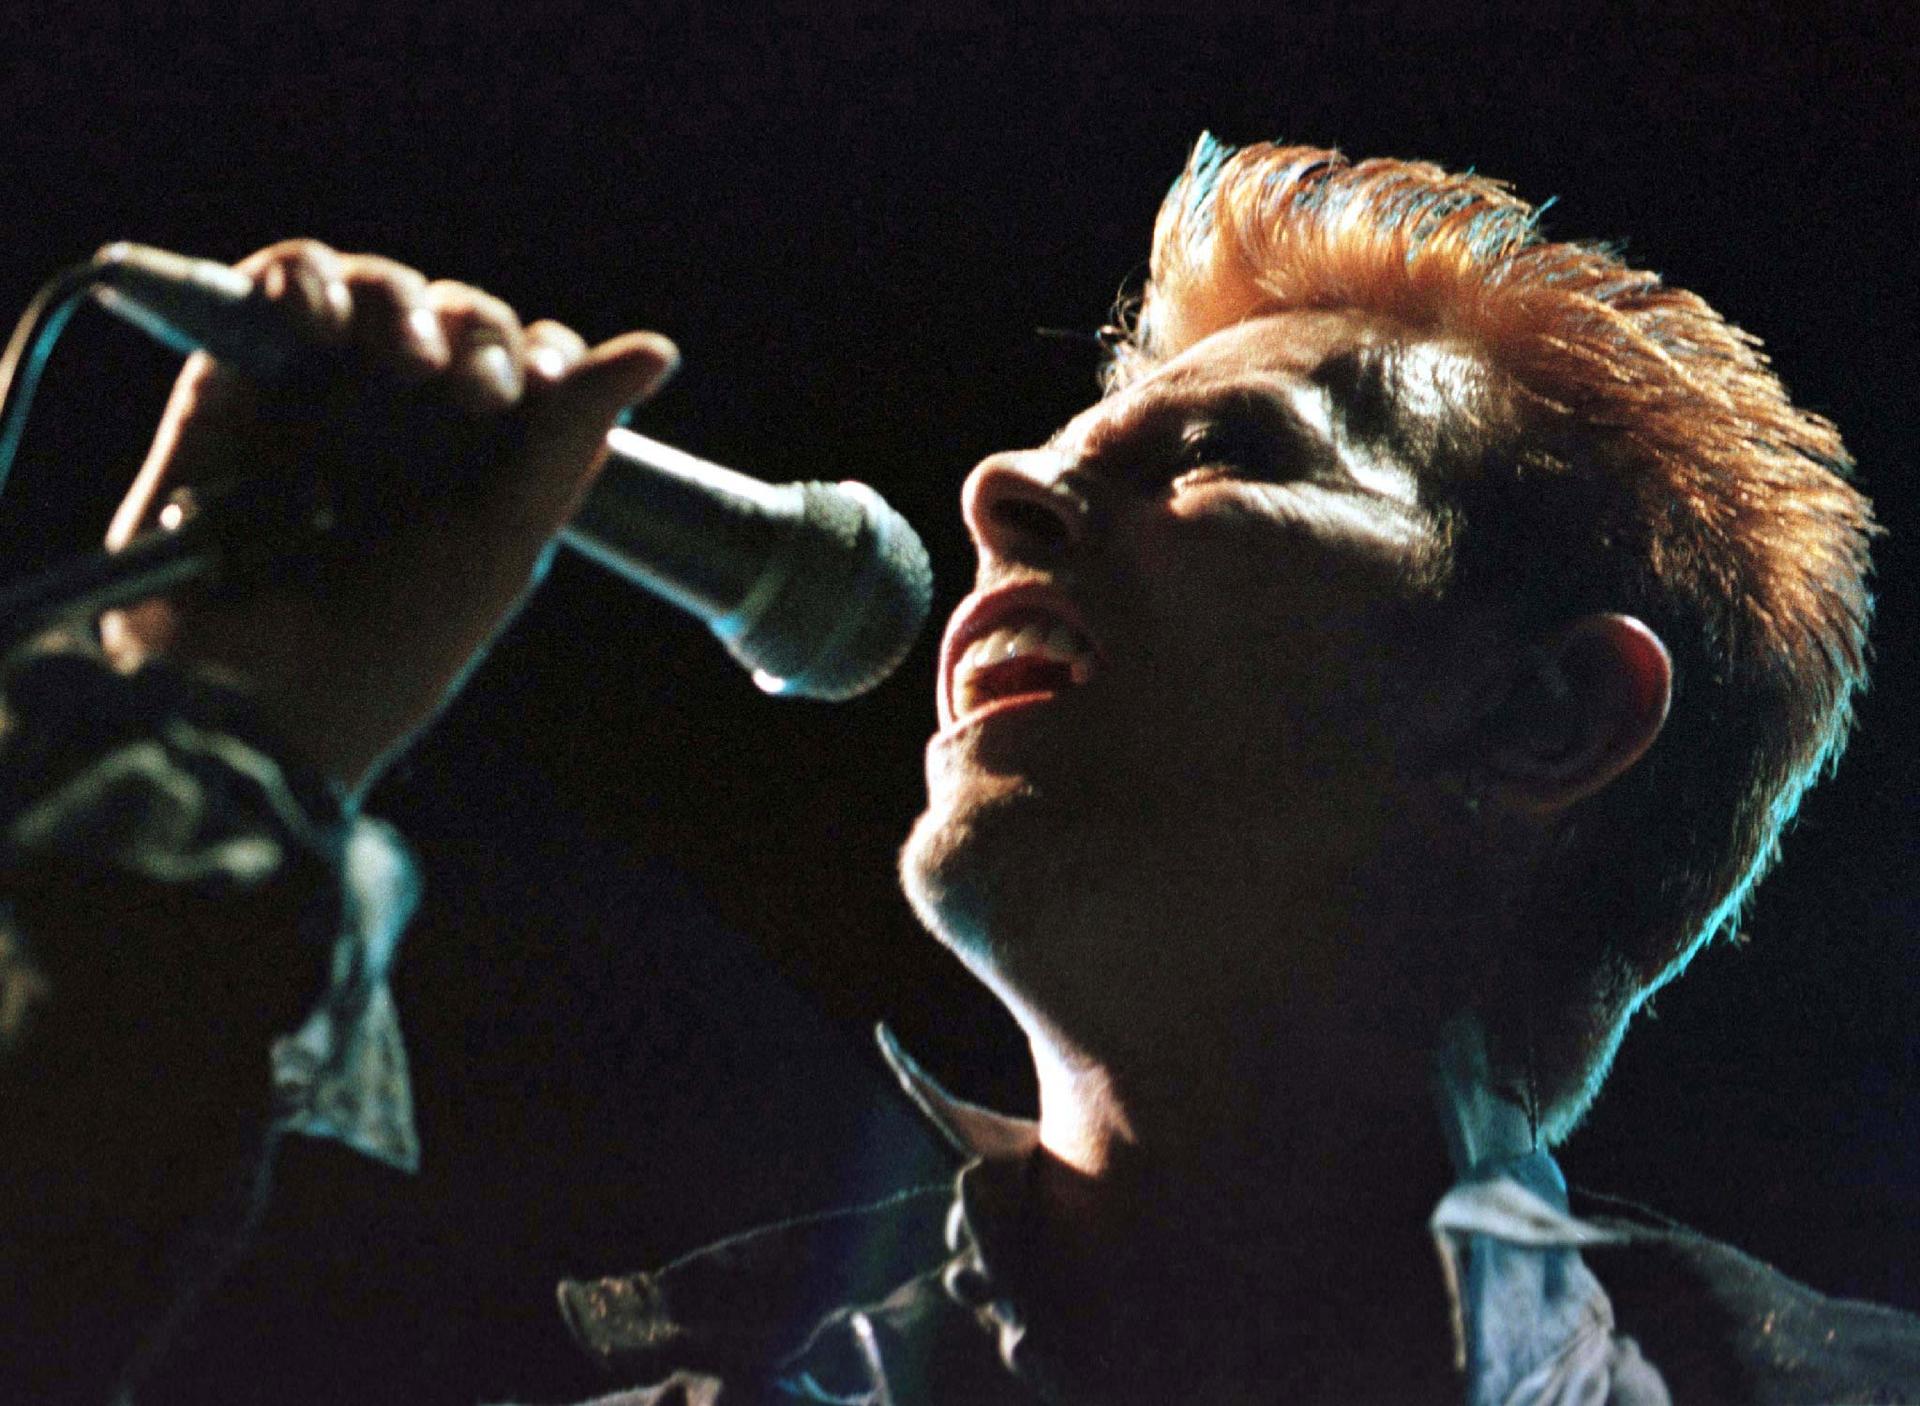 British Pop musician David Bowie performs in front of some 3,000 spectators on stage in St. Poelten, July 14, 1996.